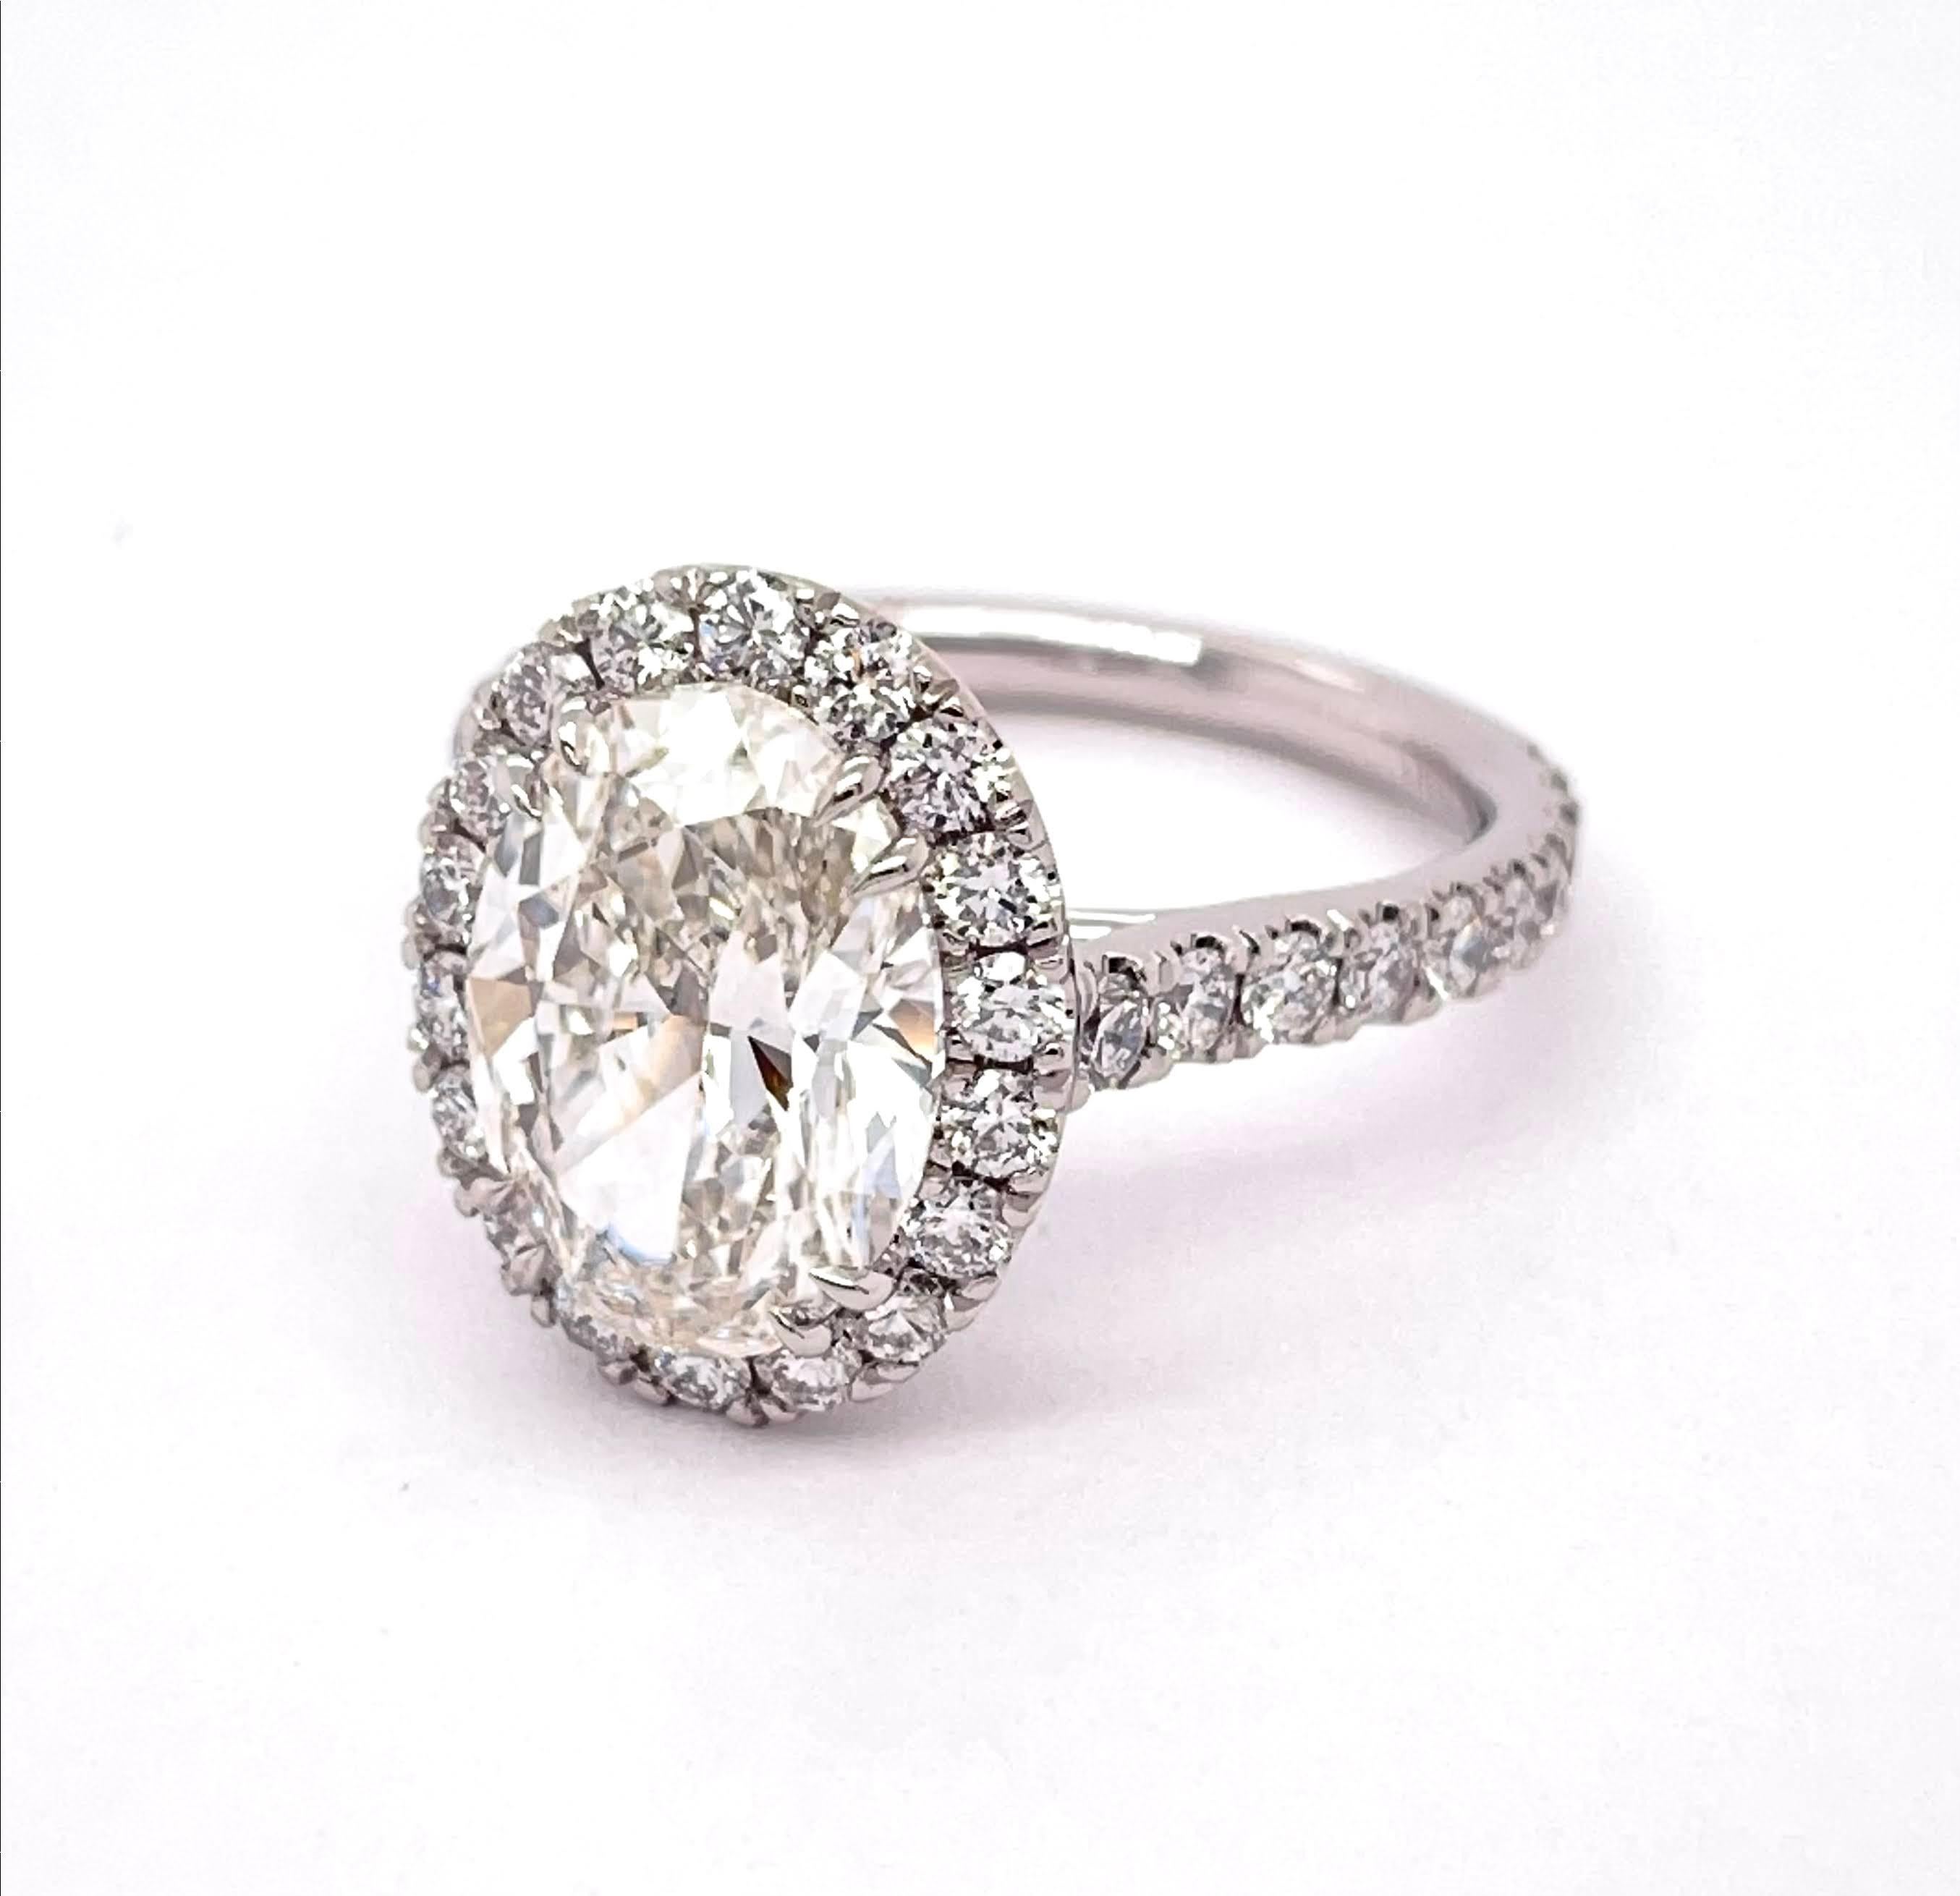 GIA Certified Oval Shape Cut Diamond 3.30, H Color VVS1 Clarity, and wrapped elegantly with 1.11 carats fine round diamonds from the halo down to its shank on a Platinum setting. Made to perfection with the highest quality.

